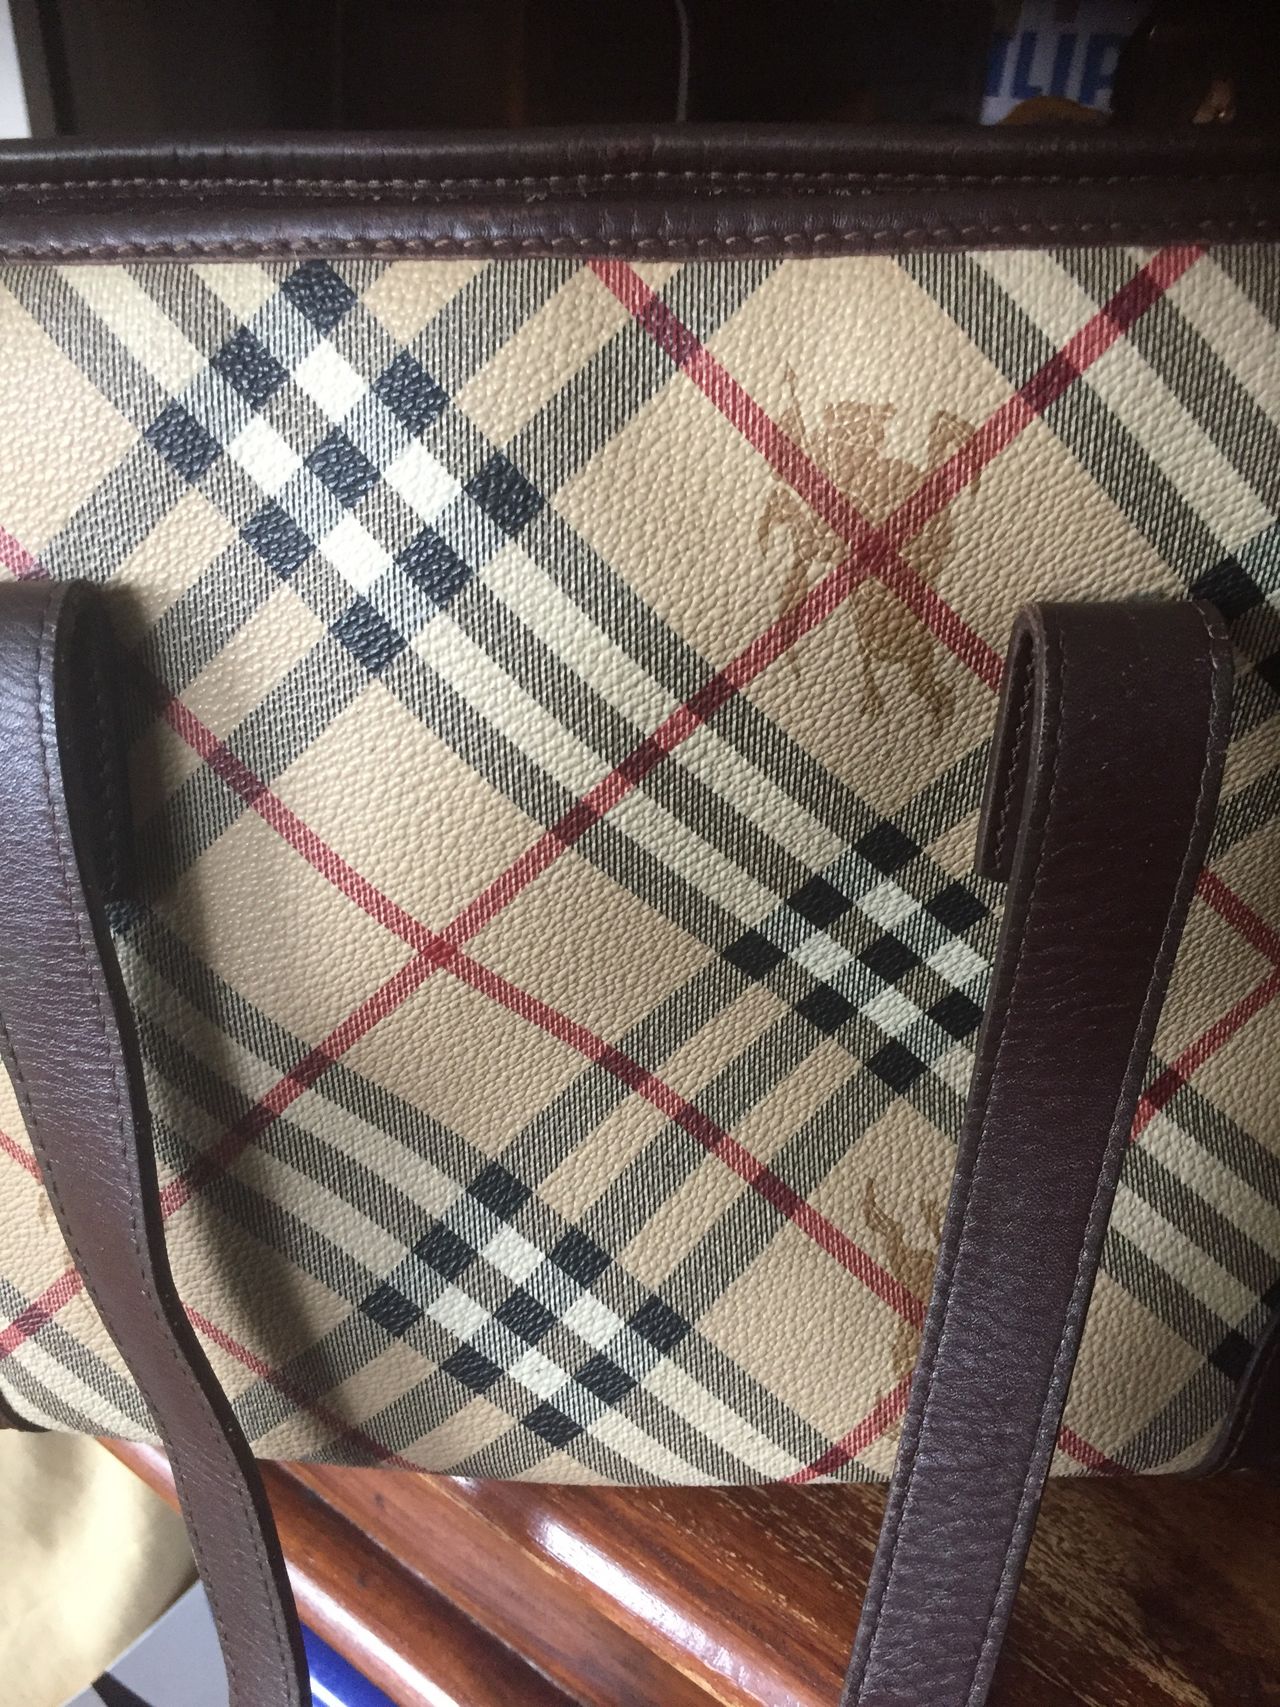 Burberry, Bags, Vintage Burberry Haymarket Tote From 209